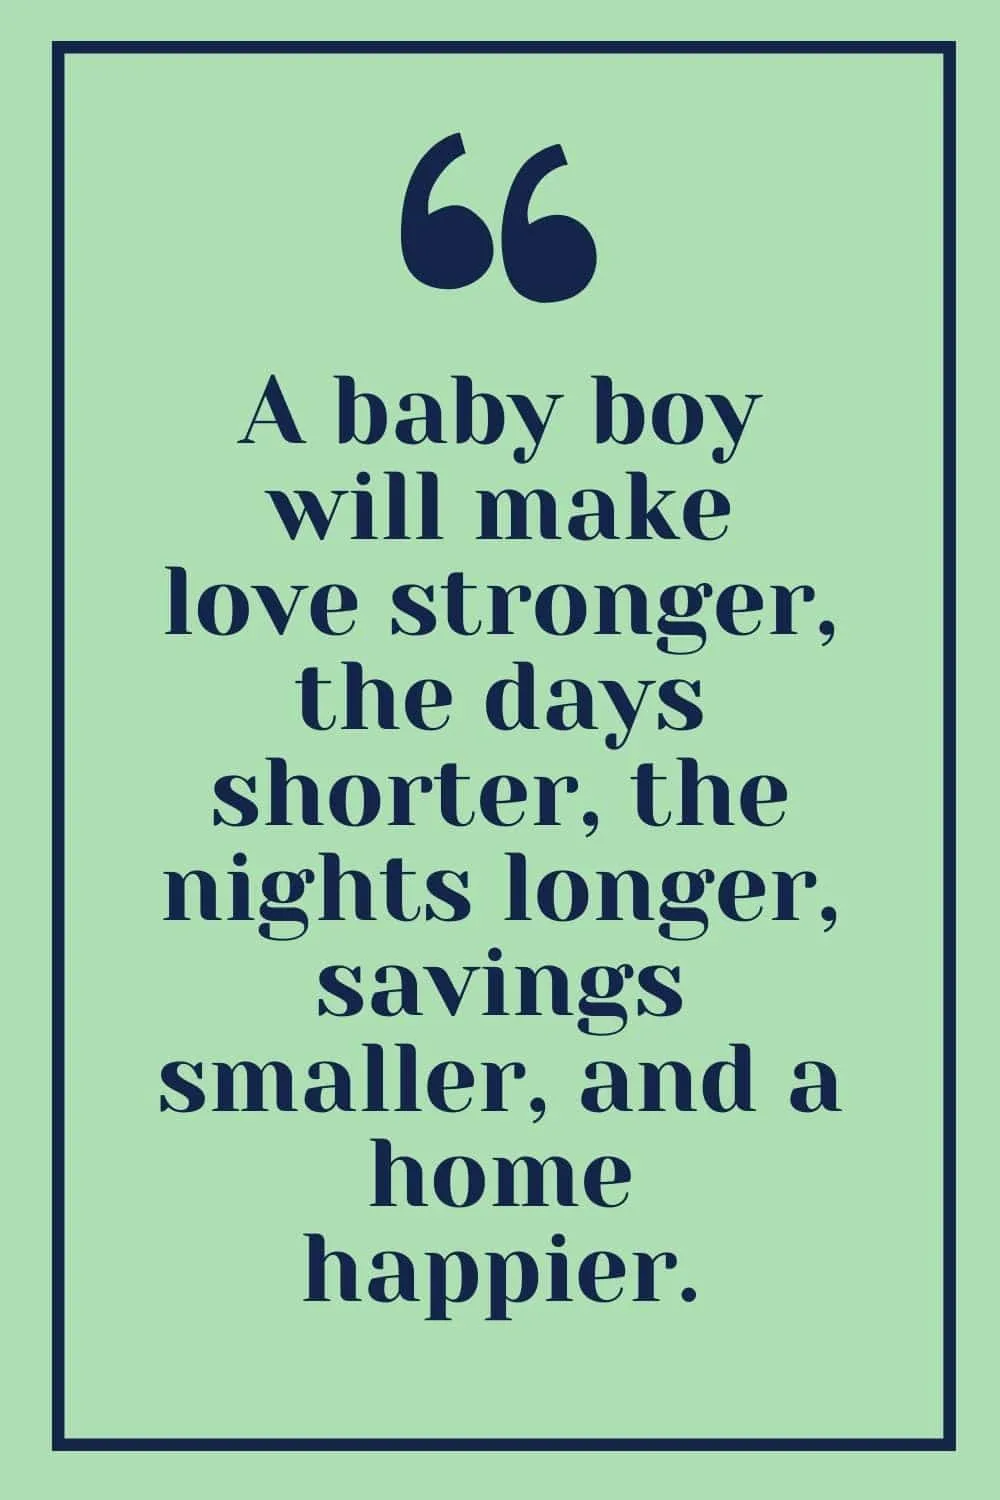 quotes about baby boys